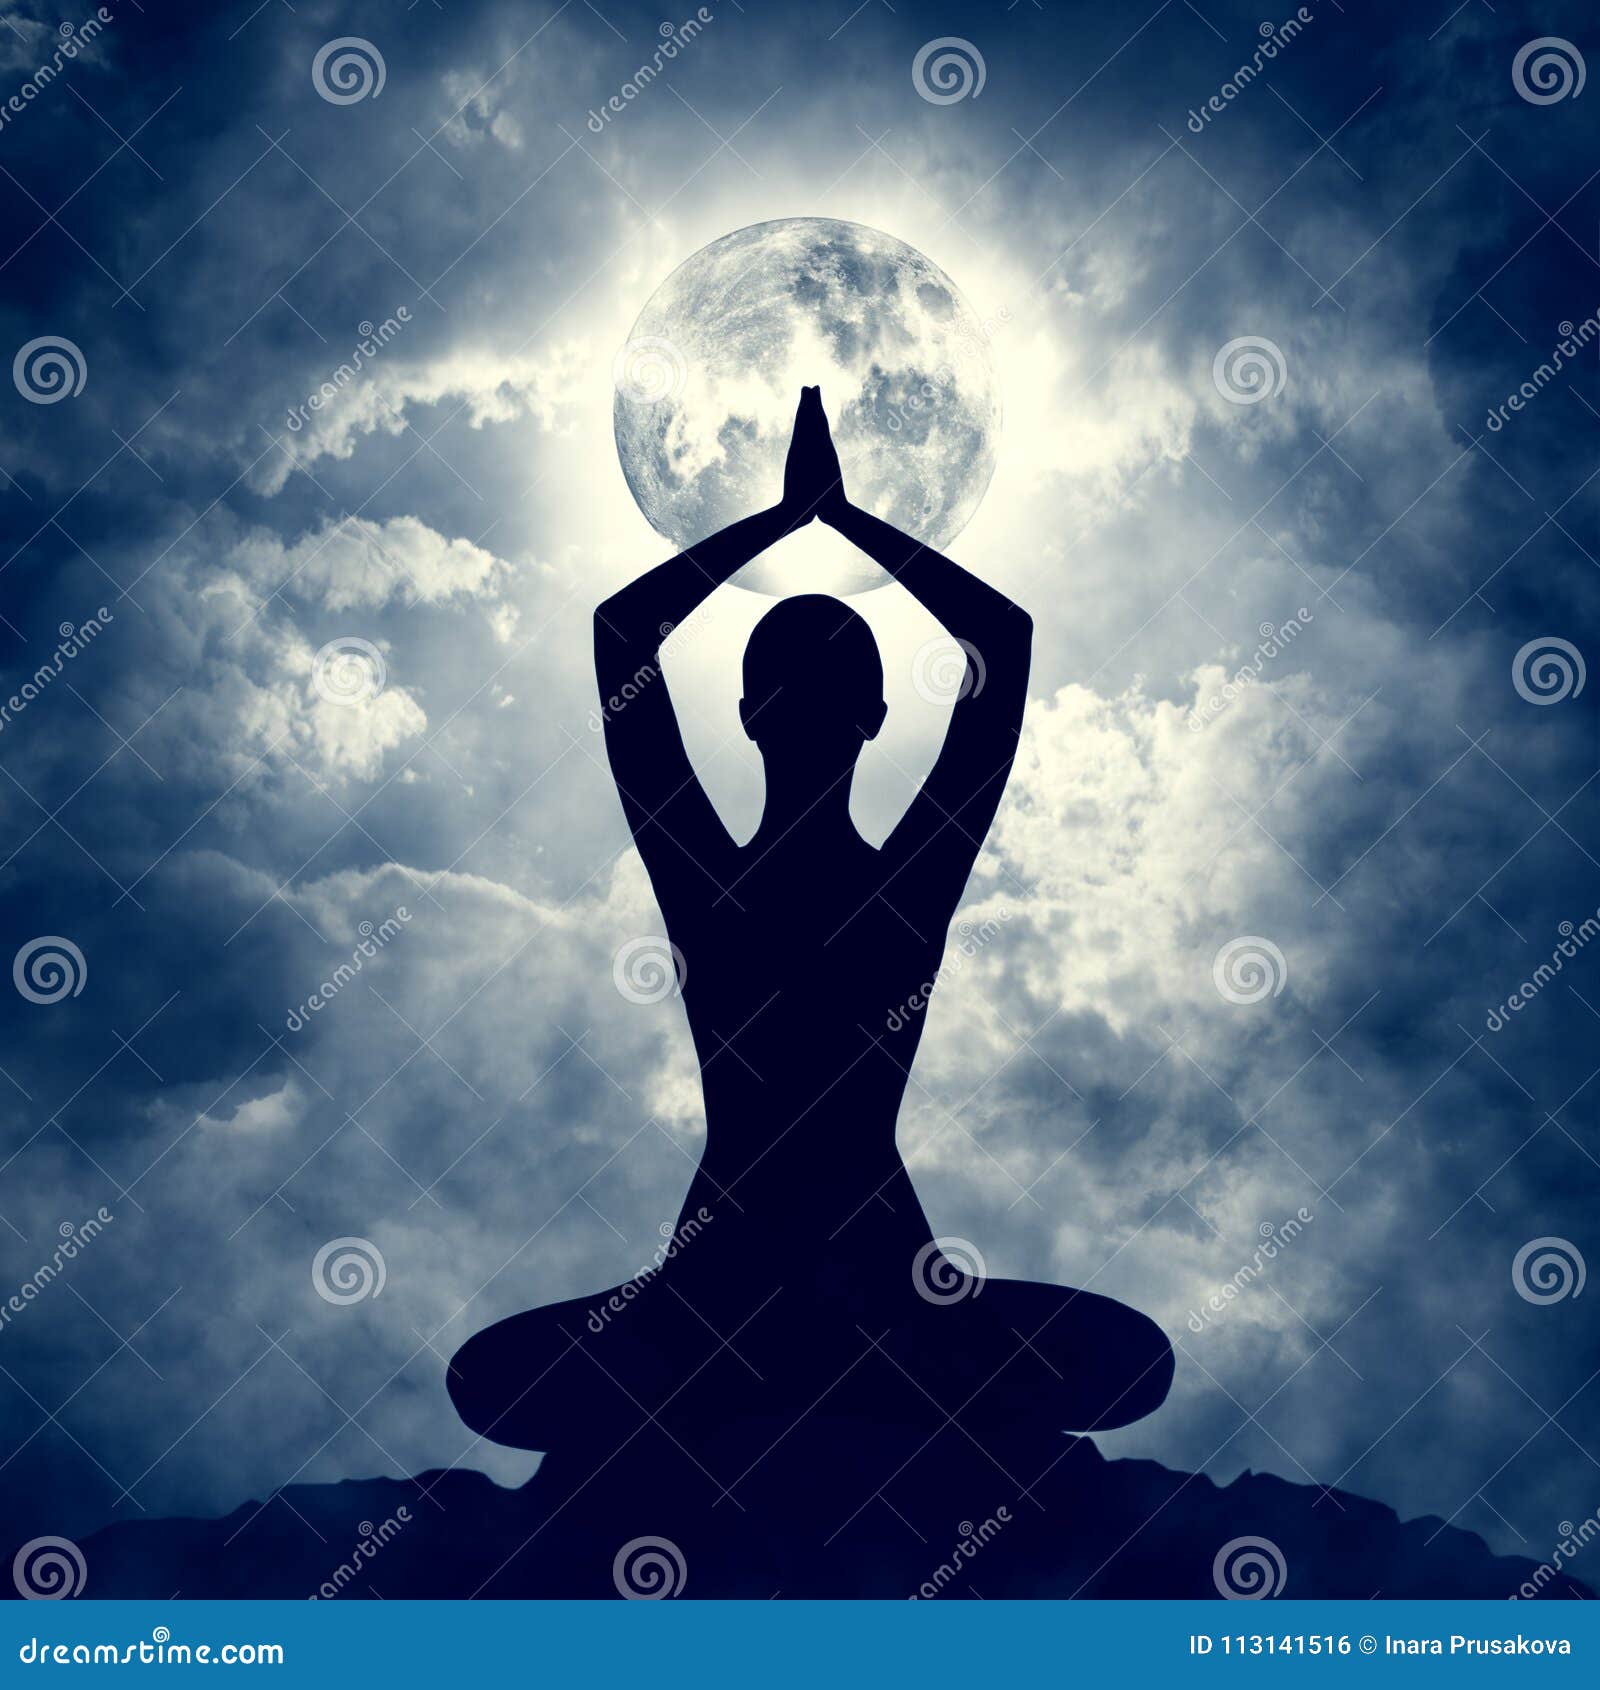 yoga body pose silhouette over moon night sly, meditation exercise